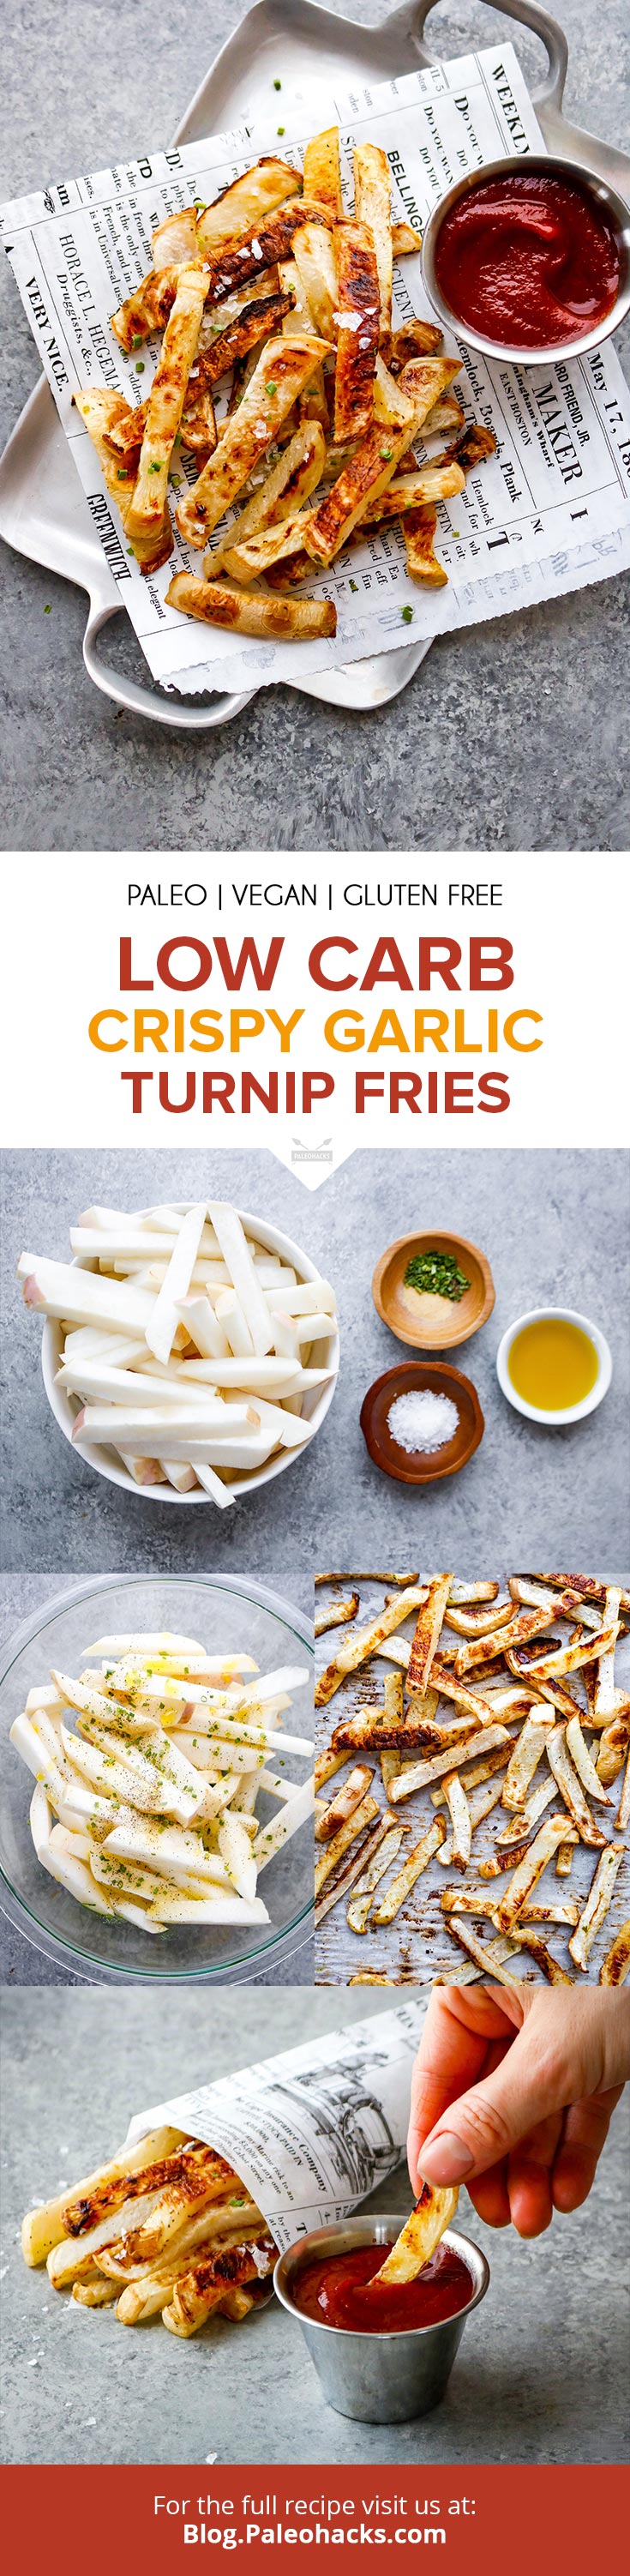 Feed your French fry craving with these crunchy turnips roasted to golden-brown perfection. Potatoes who? Turnips are our new favorite!